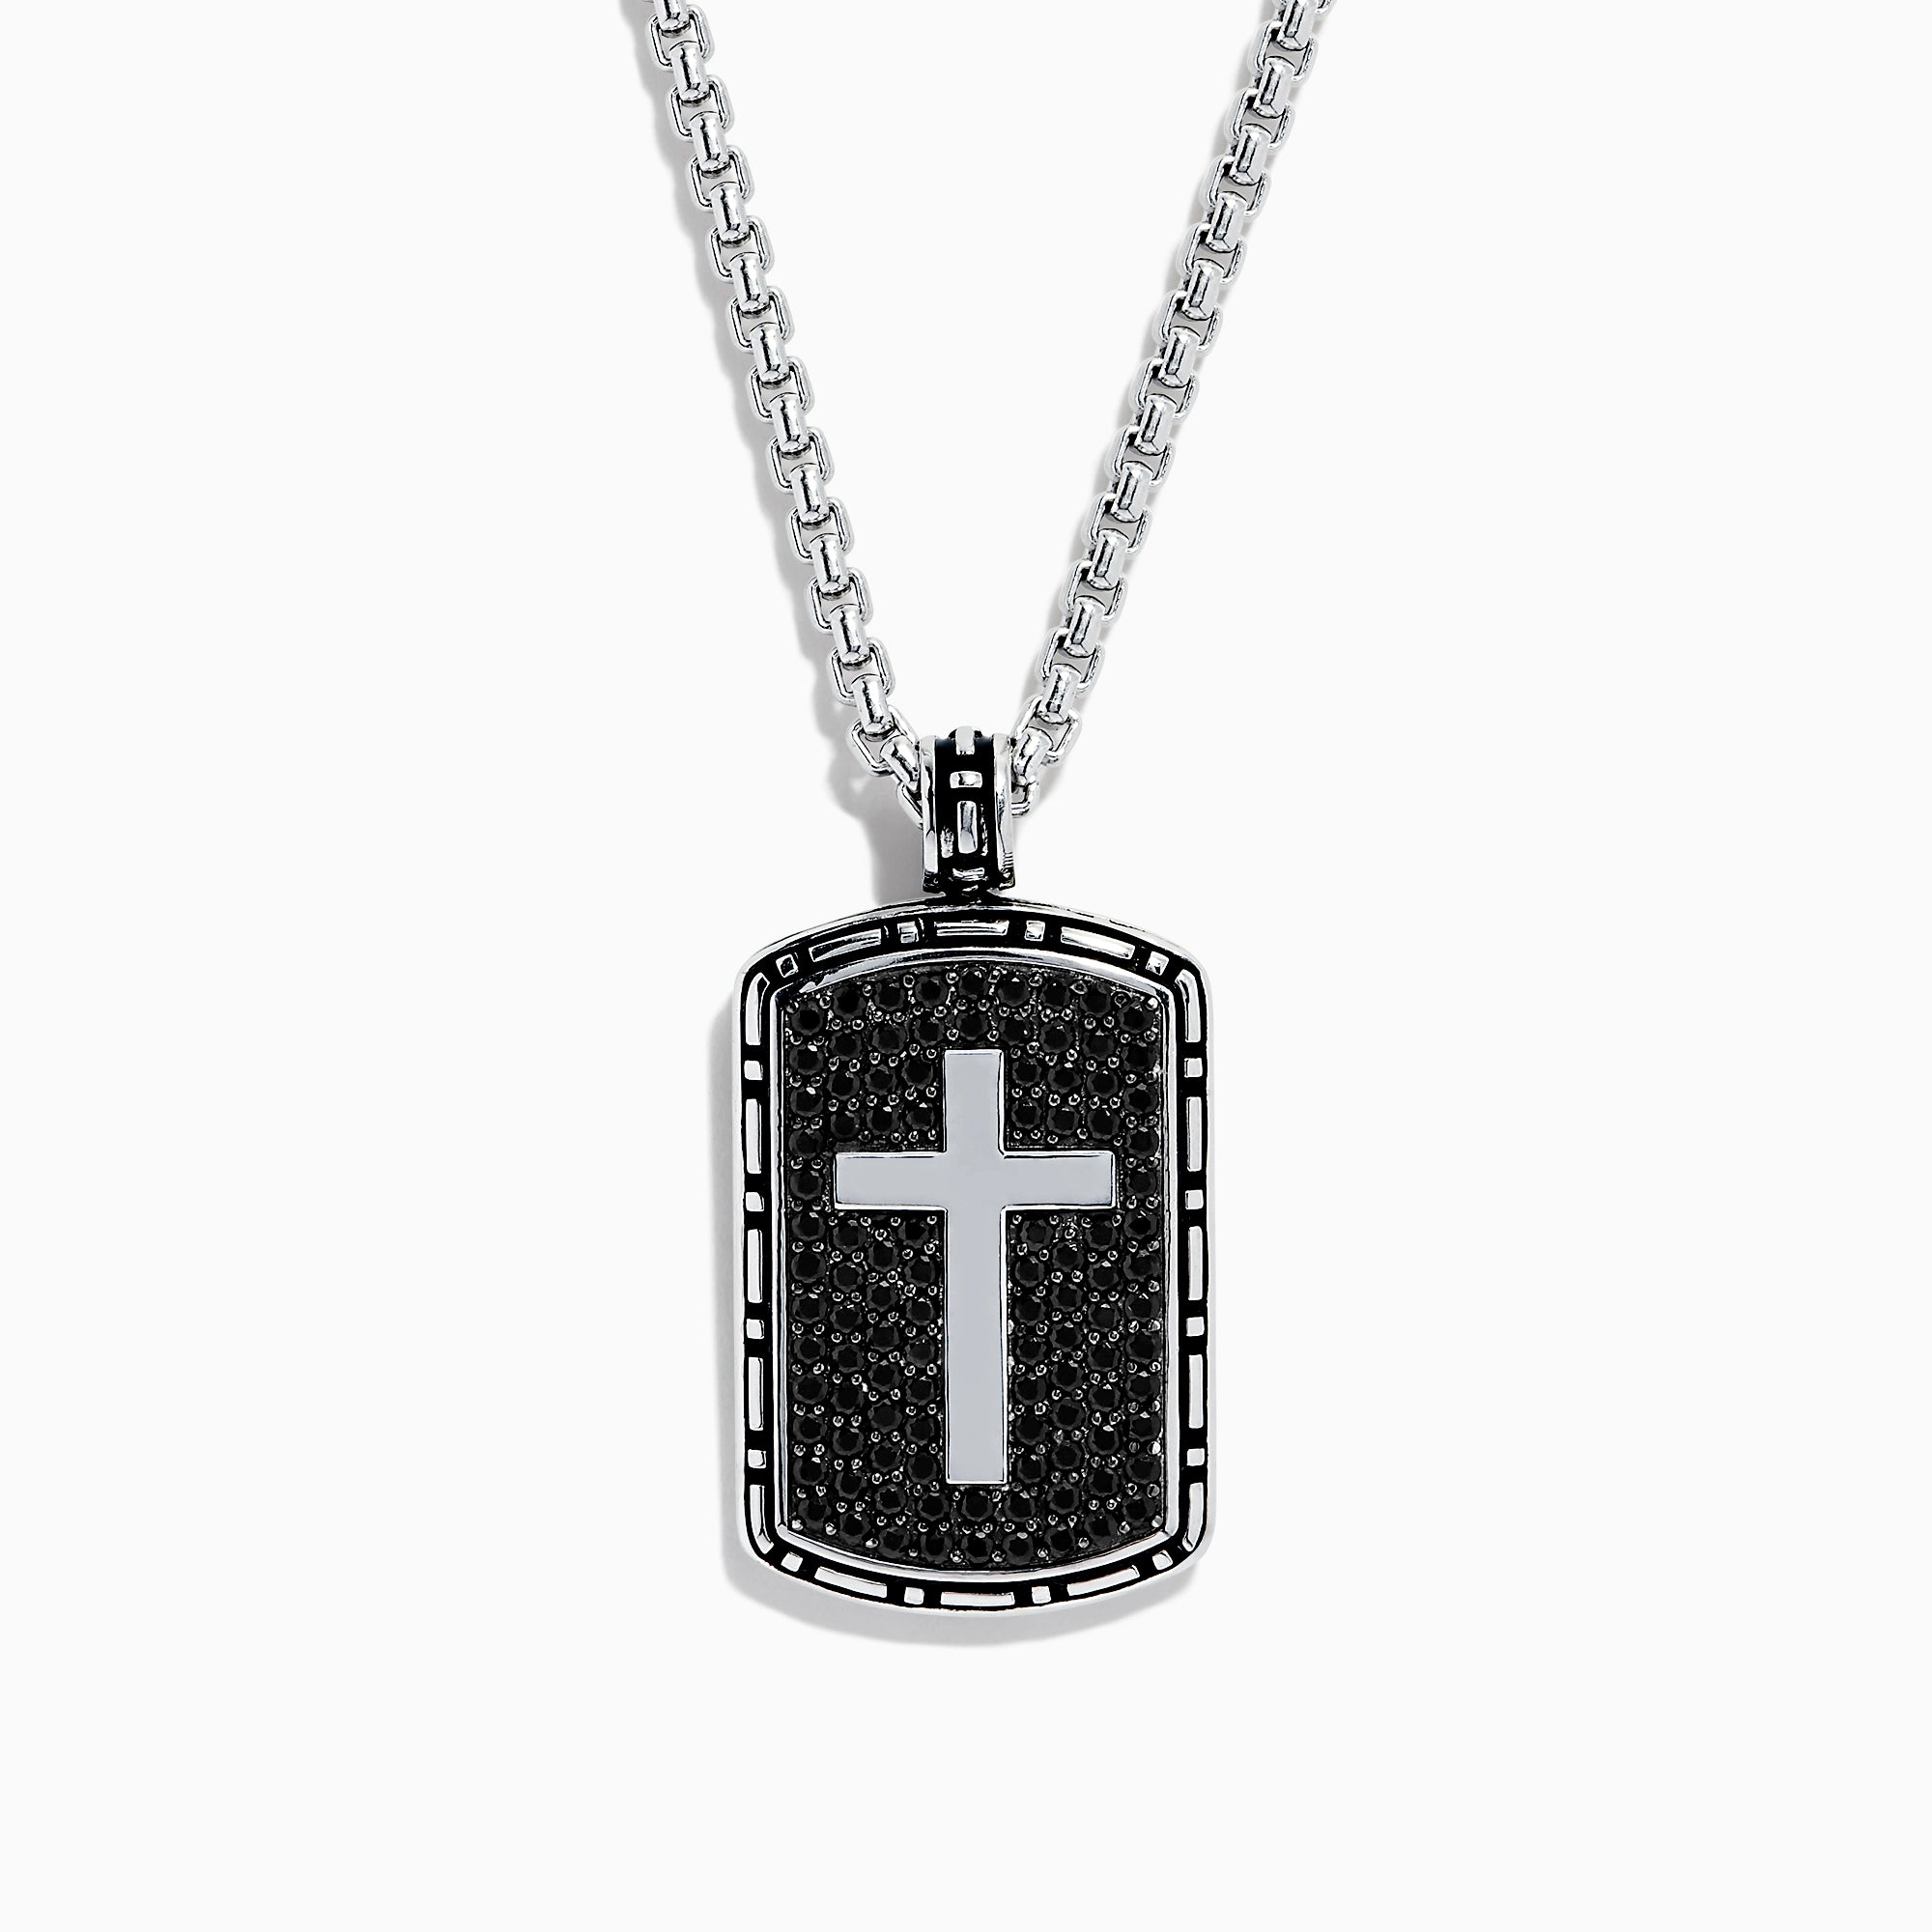 Men's Oxidized Sterling Silver Dog Tag Necklace in Black Hematite